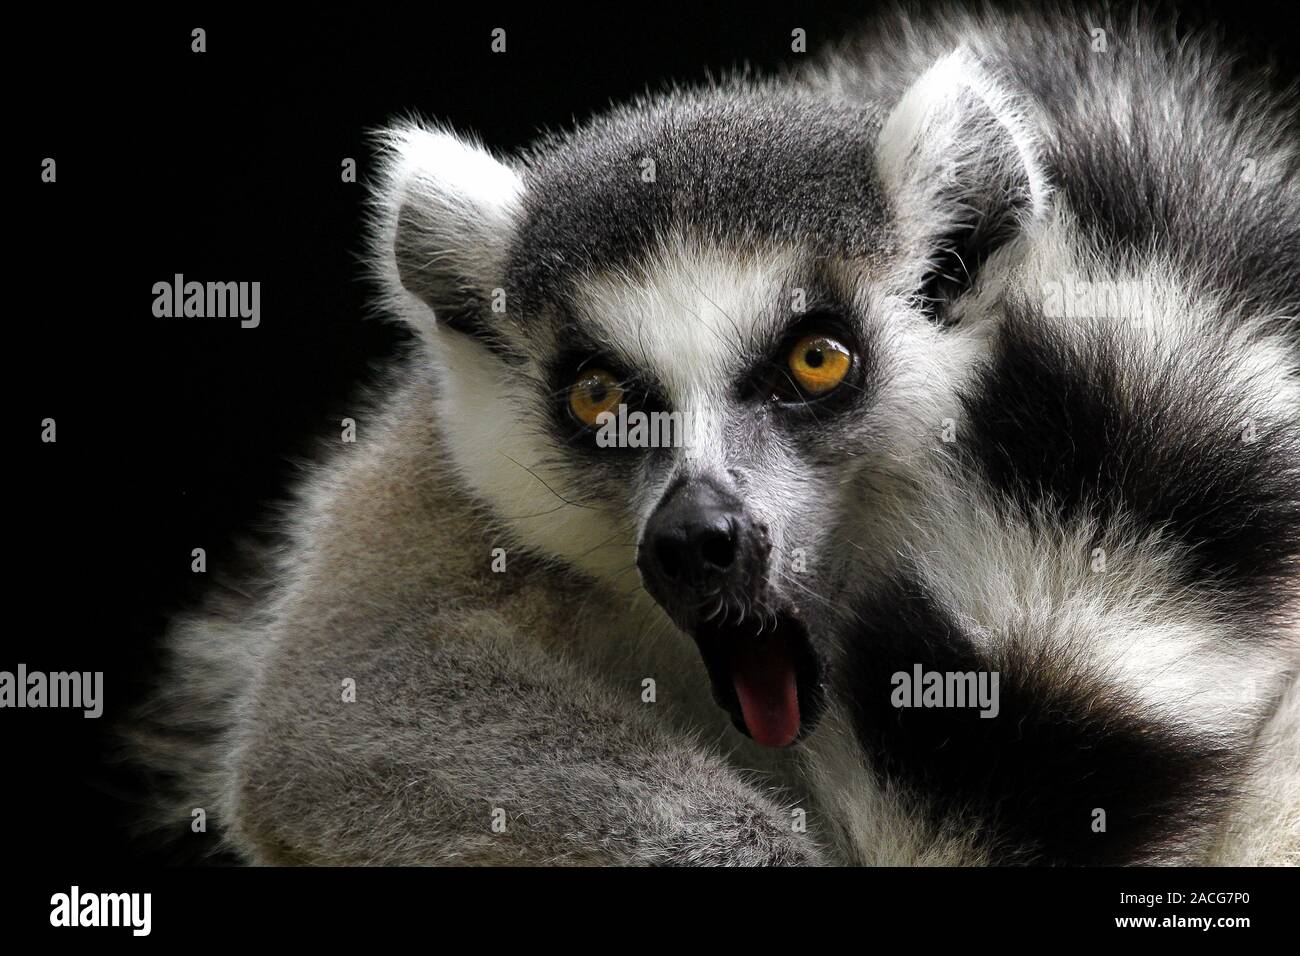 Portrait of a ring-tailed lemur, Indonesia Stock Photo